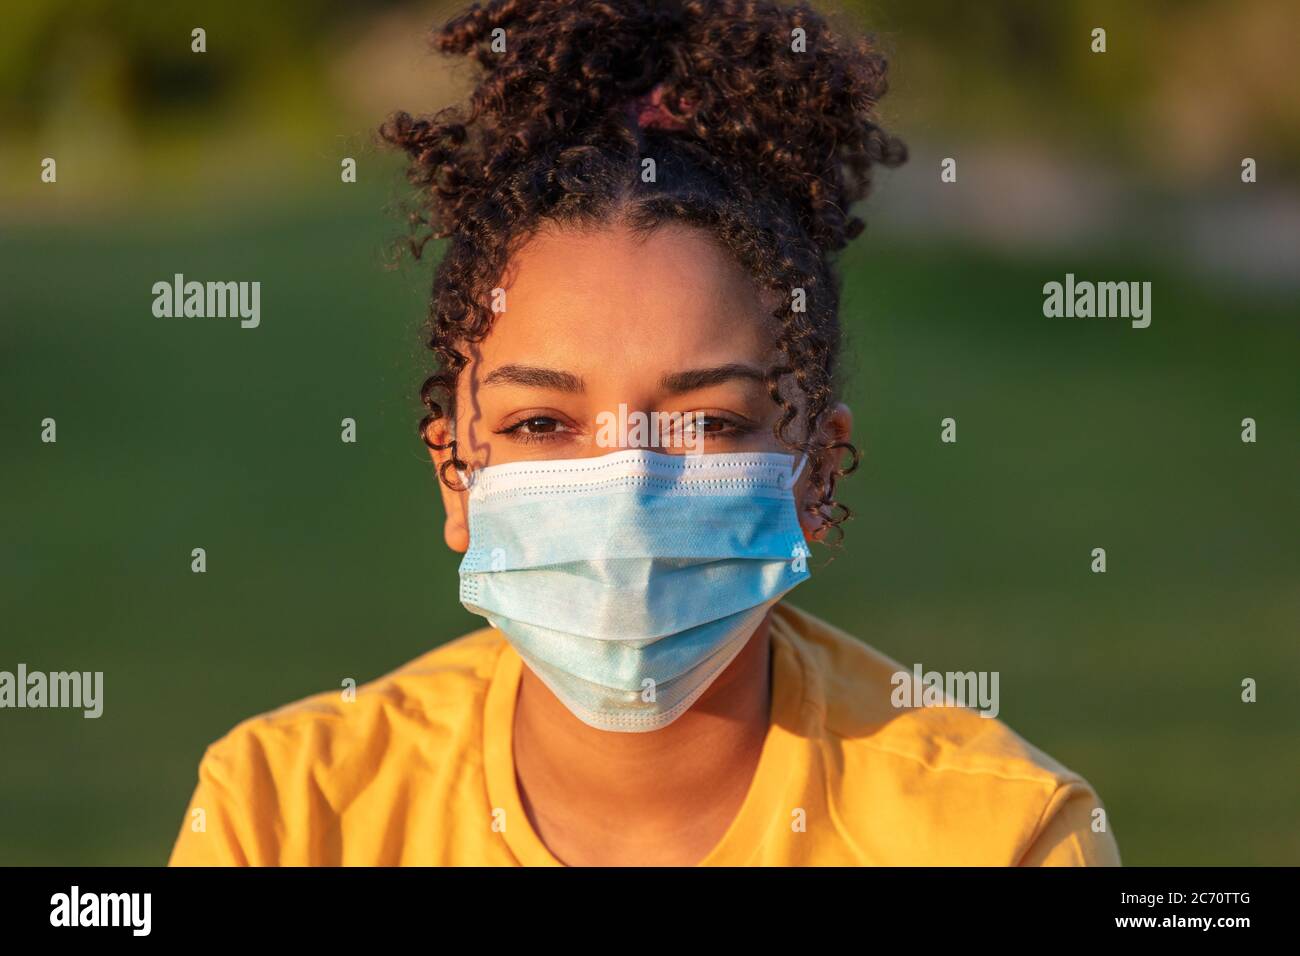 Mixed race African American teenager teen girl young woman wearing a face mask outside during the Coronavirus COVID-19 pandemic Stock Photo